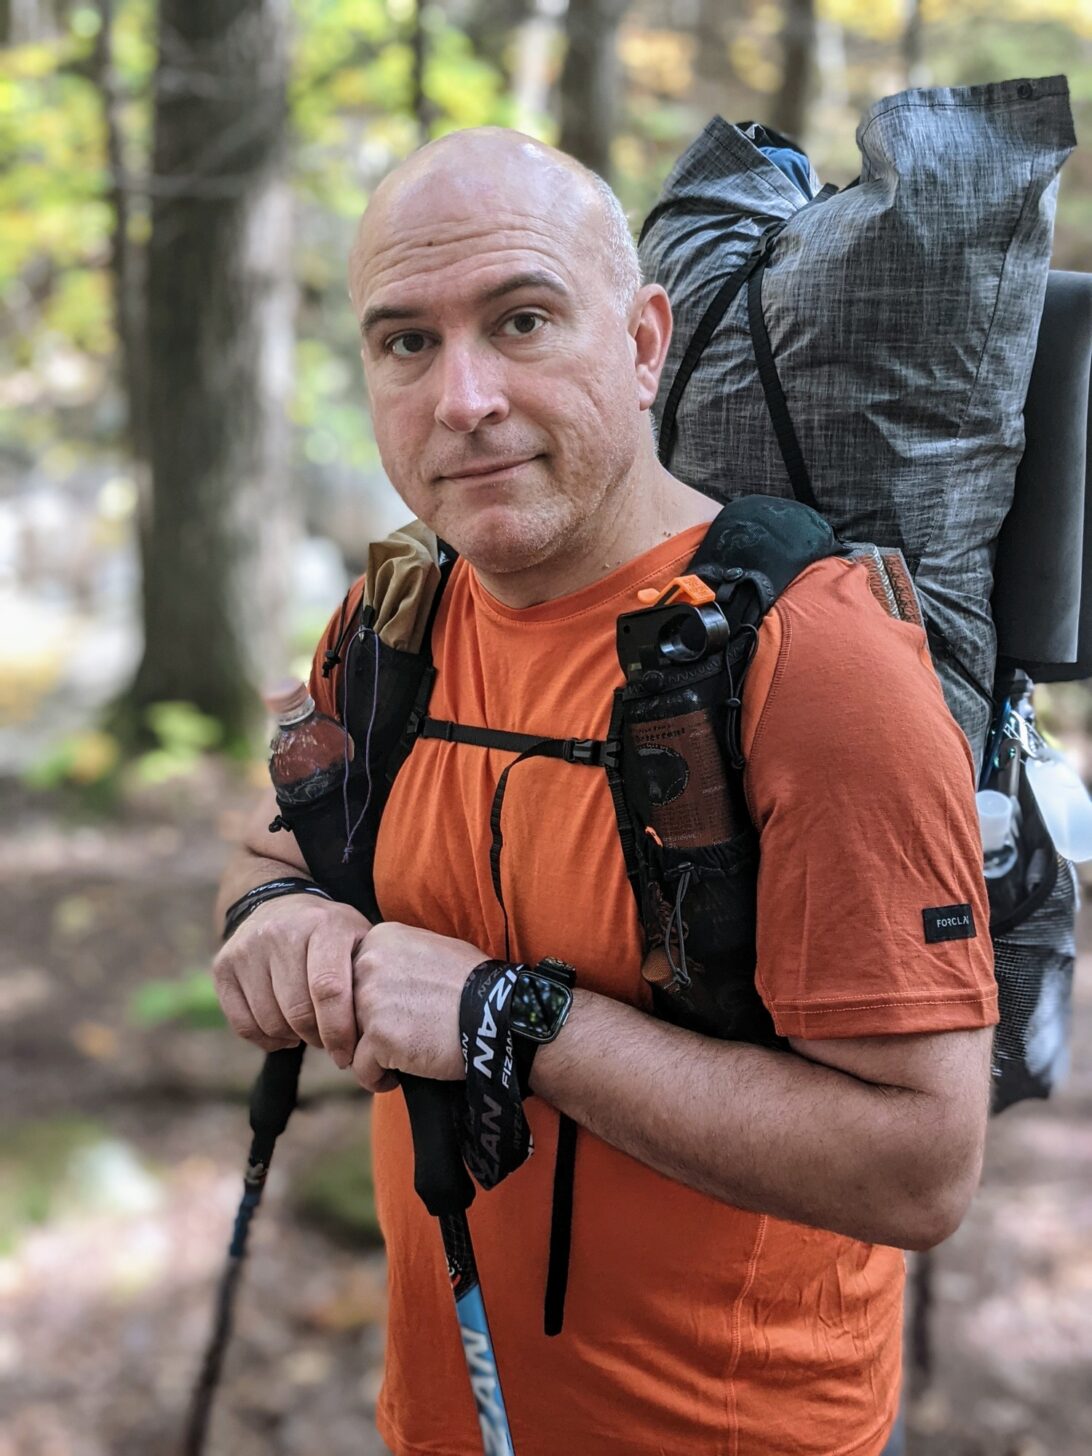 a man wearing a Nashville Pack Cutaway backpack looks directly at the camera.